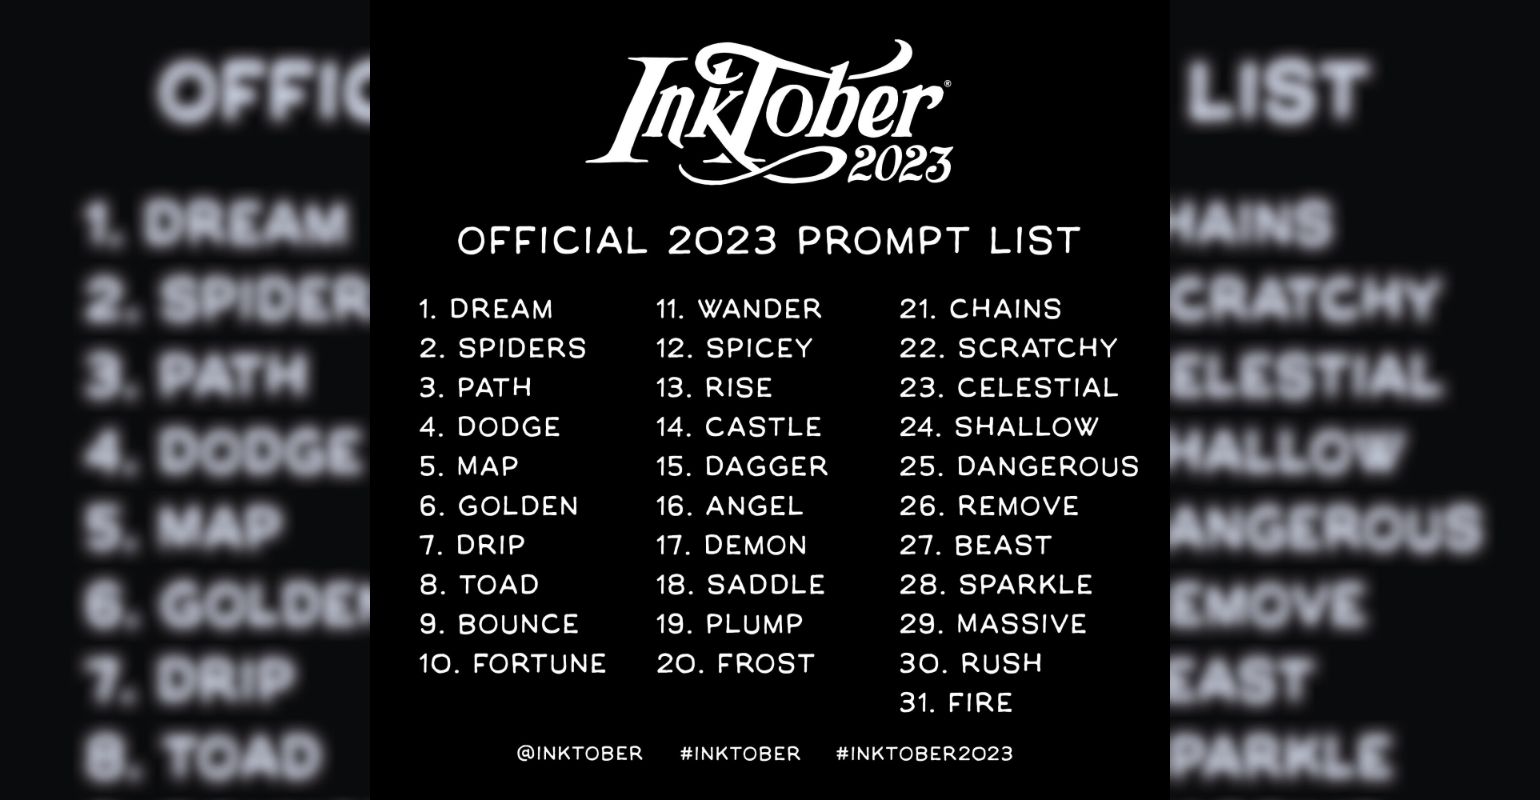 GUIDE: Inktober 2023 and Prompts